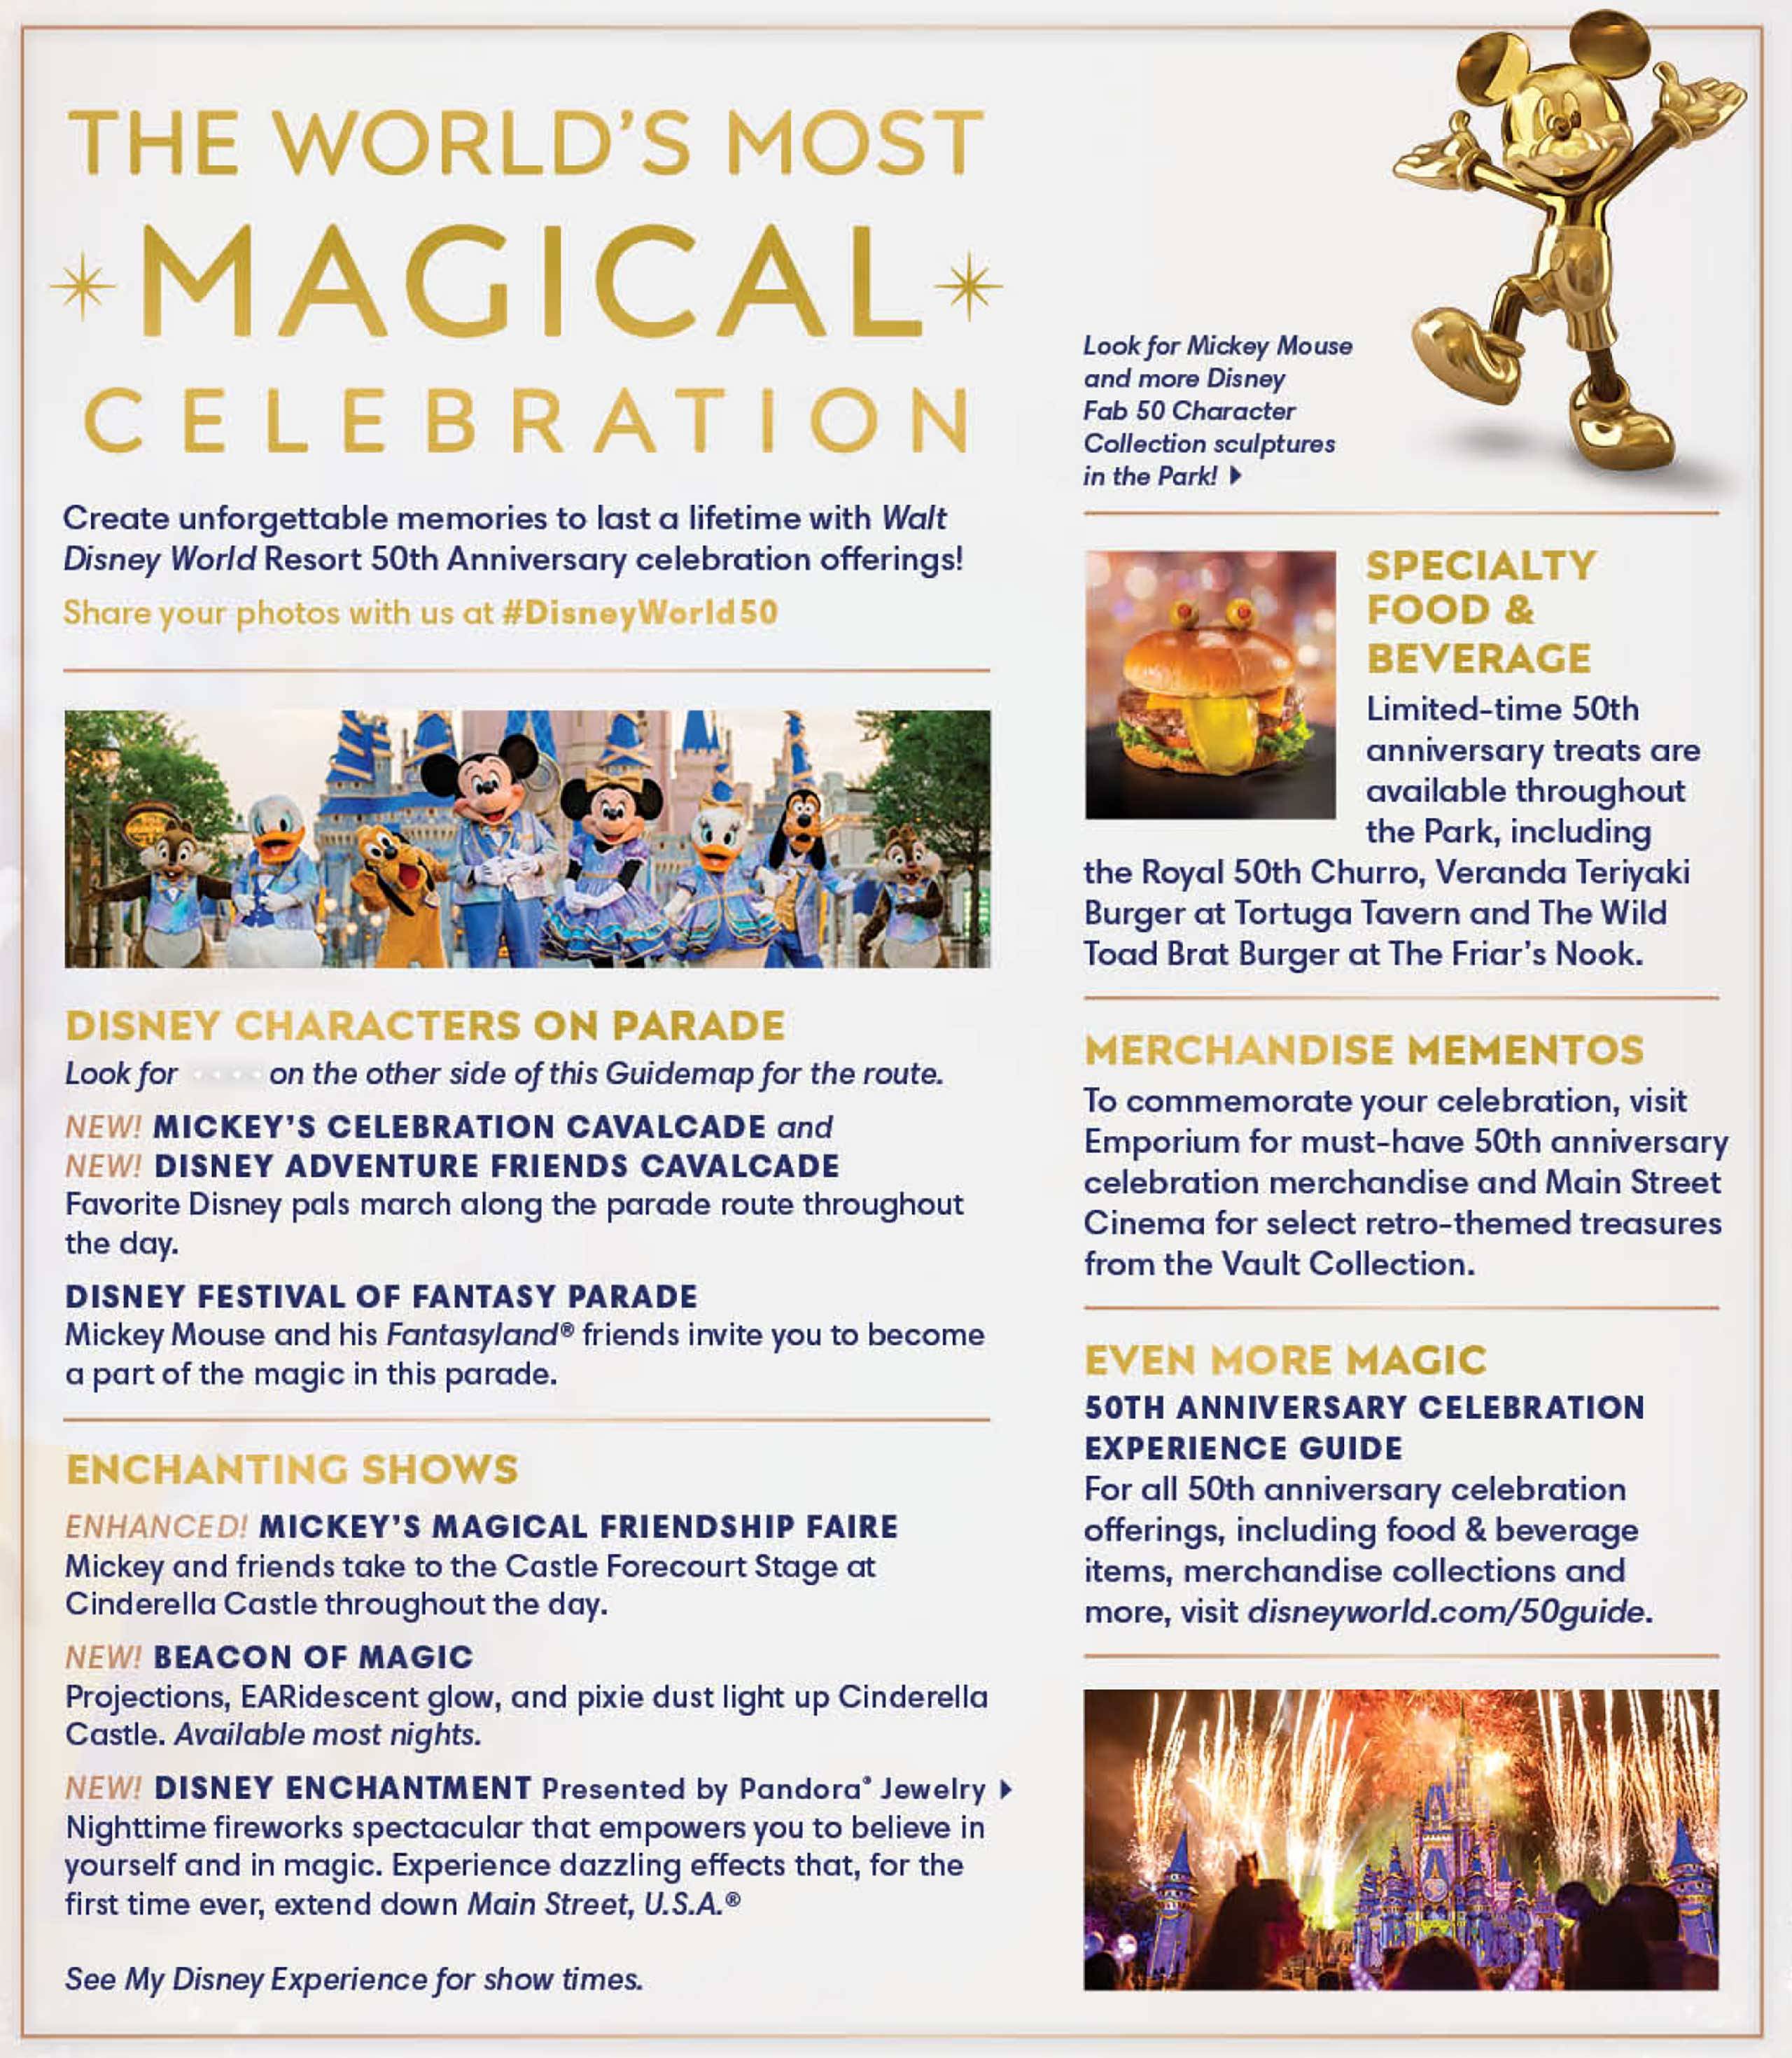 New Magic Kingdom guide map includes updated show and parade details